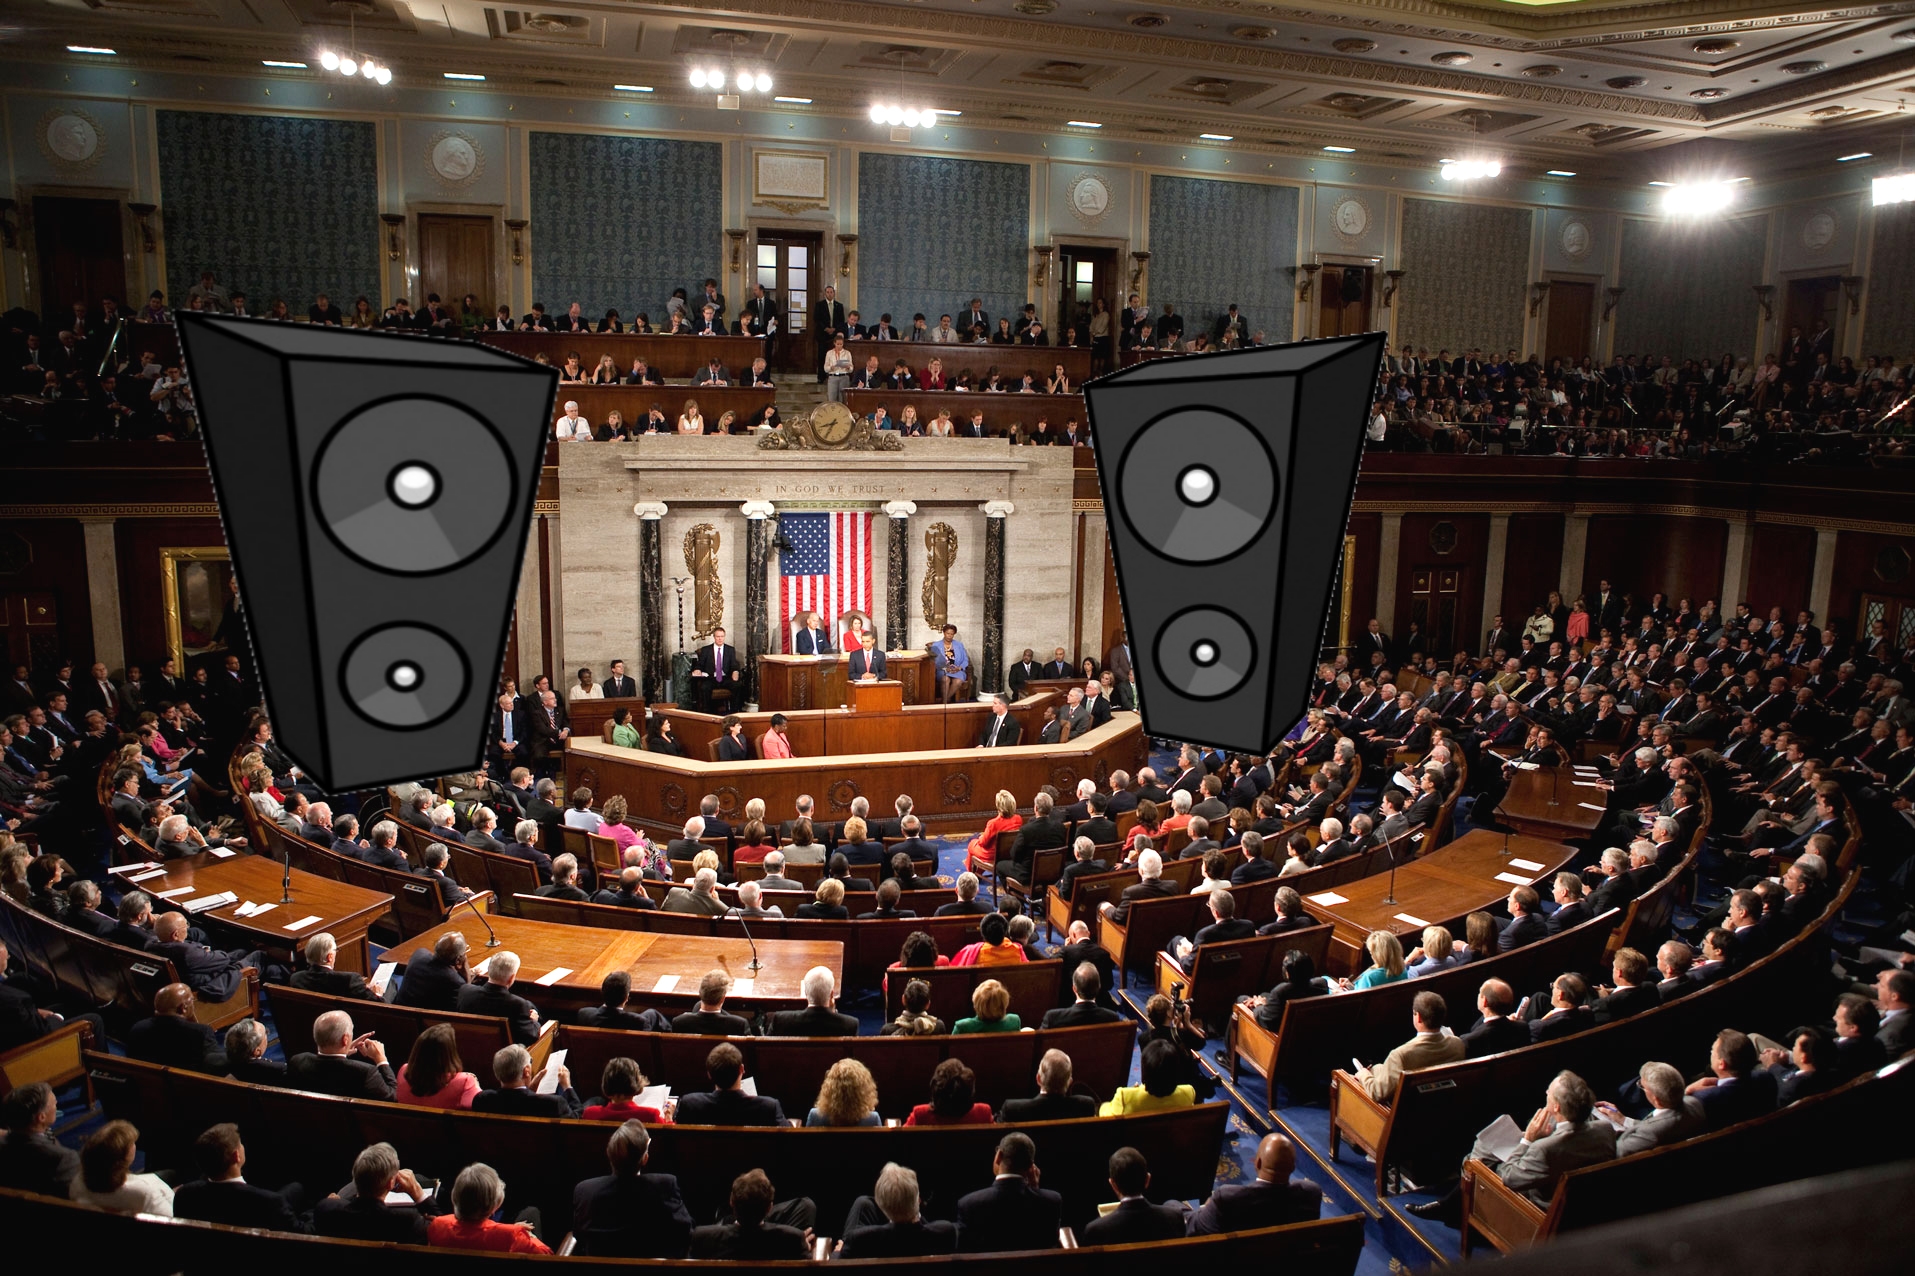 Spotify Got Congress To Make Playlists Of Their Fave Tracks